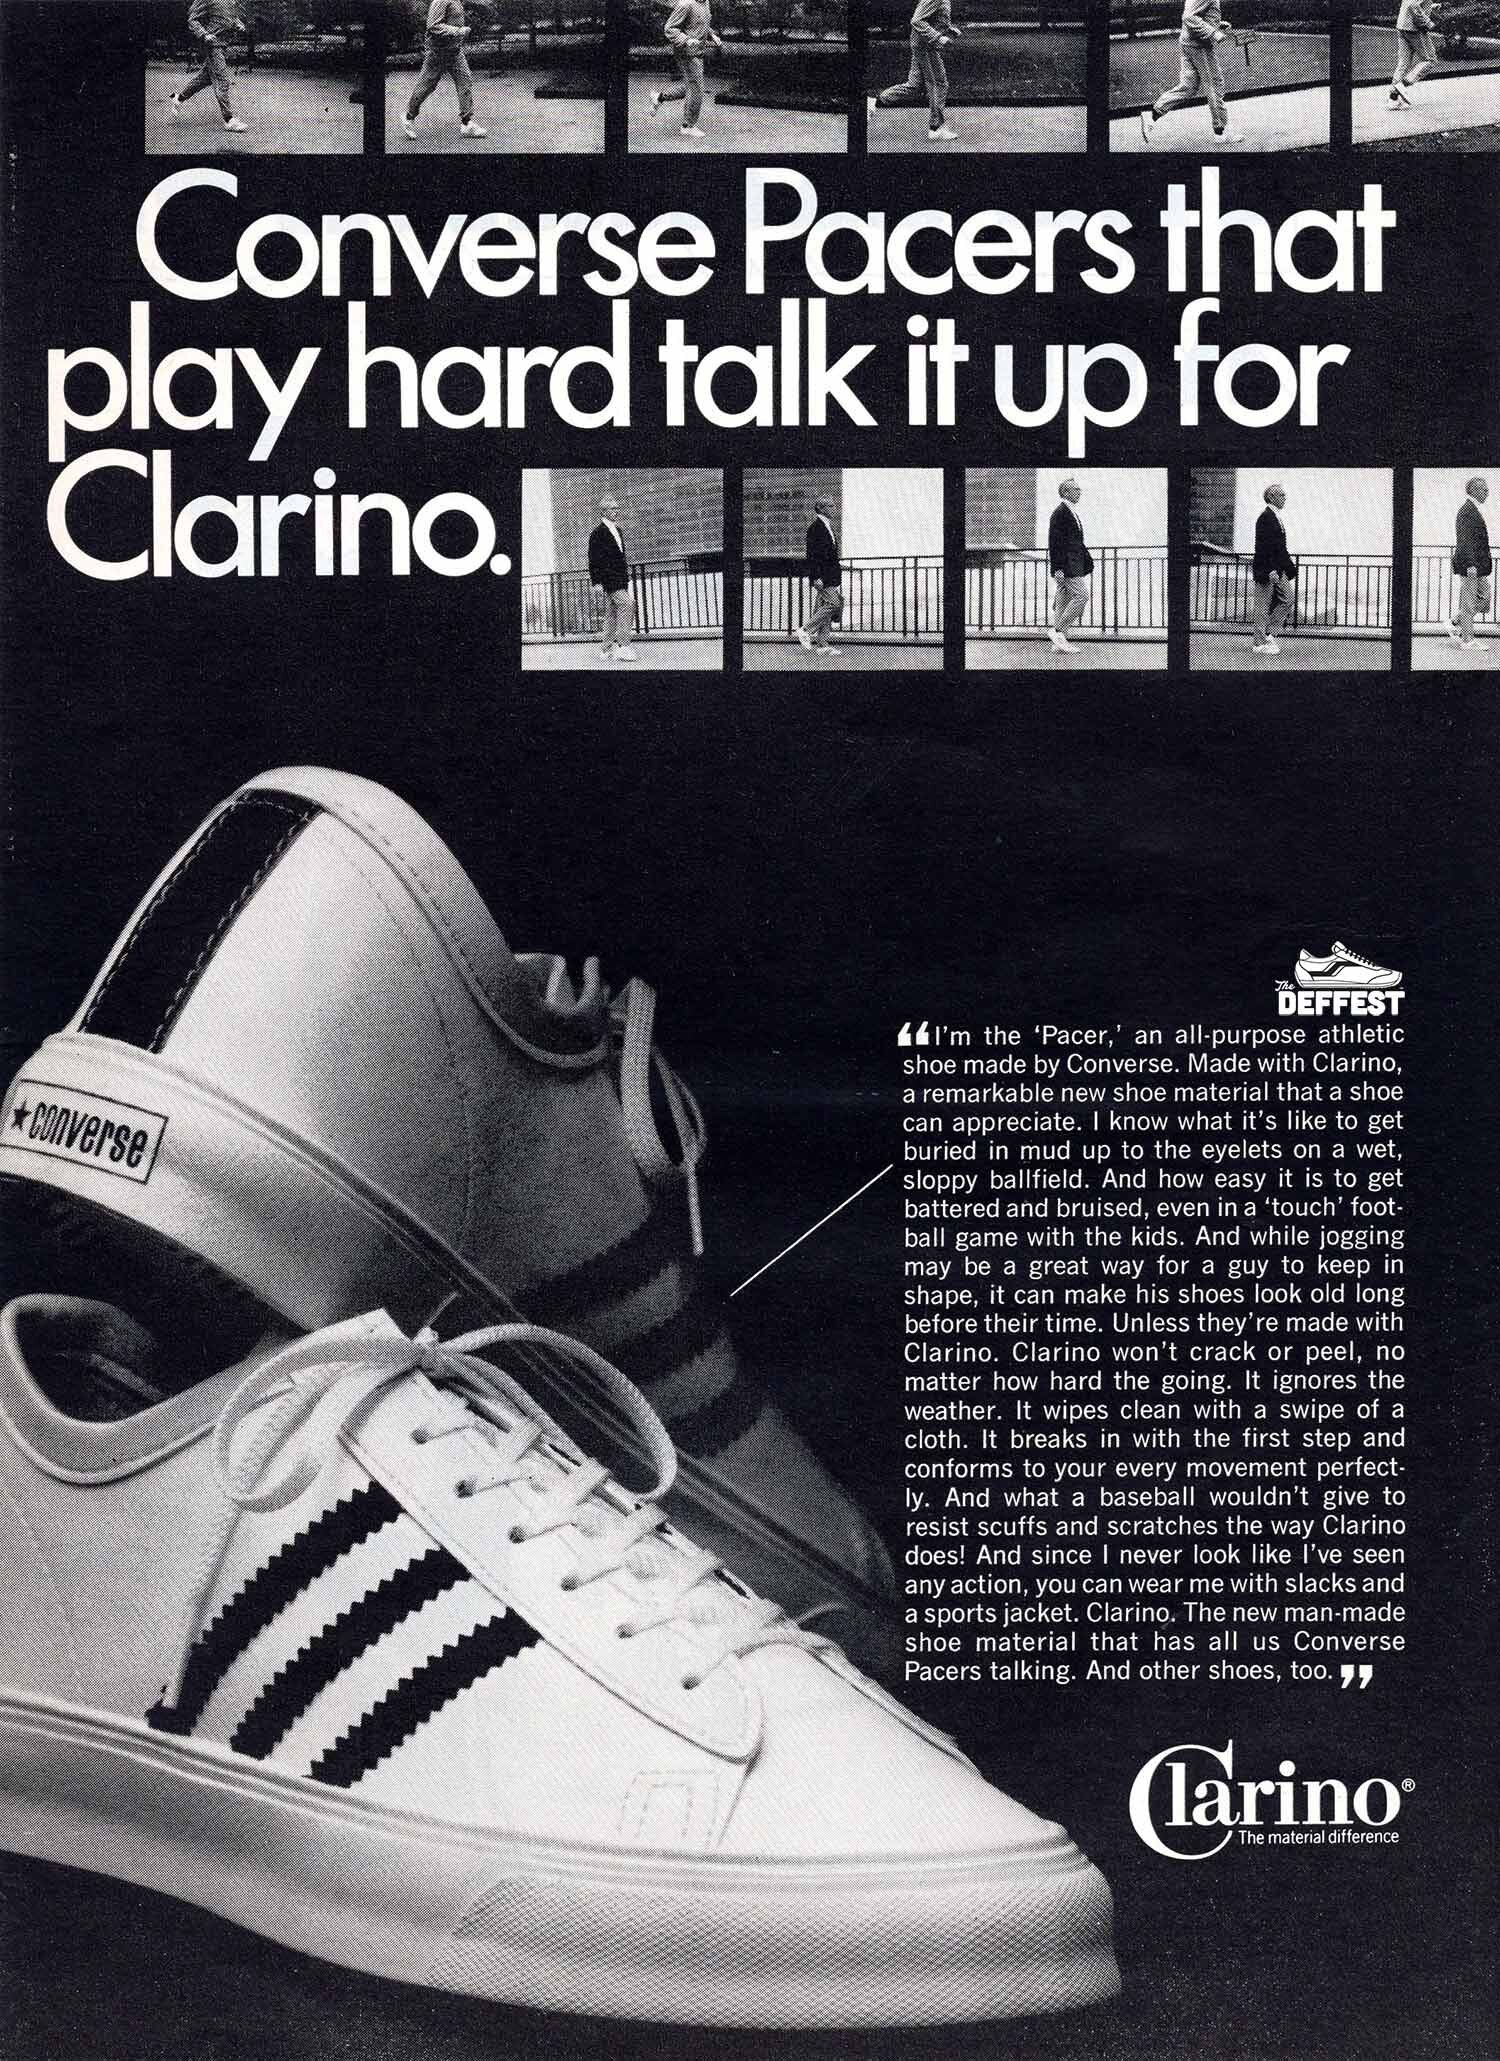 KangaROOS running shoes — The Deffest®. A vintage and retro sneaker blog. —  Vintage Ads